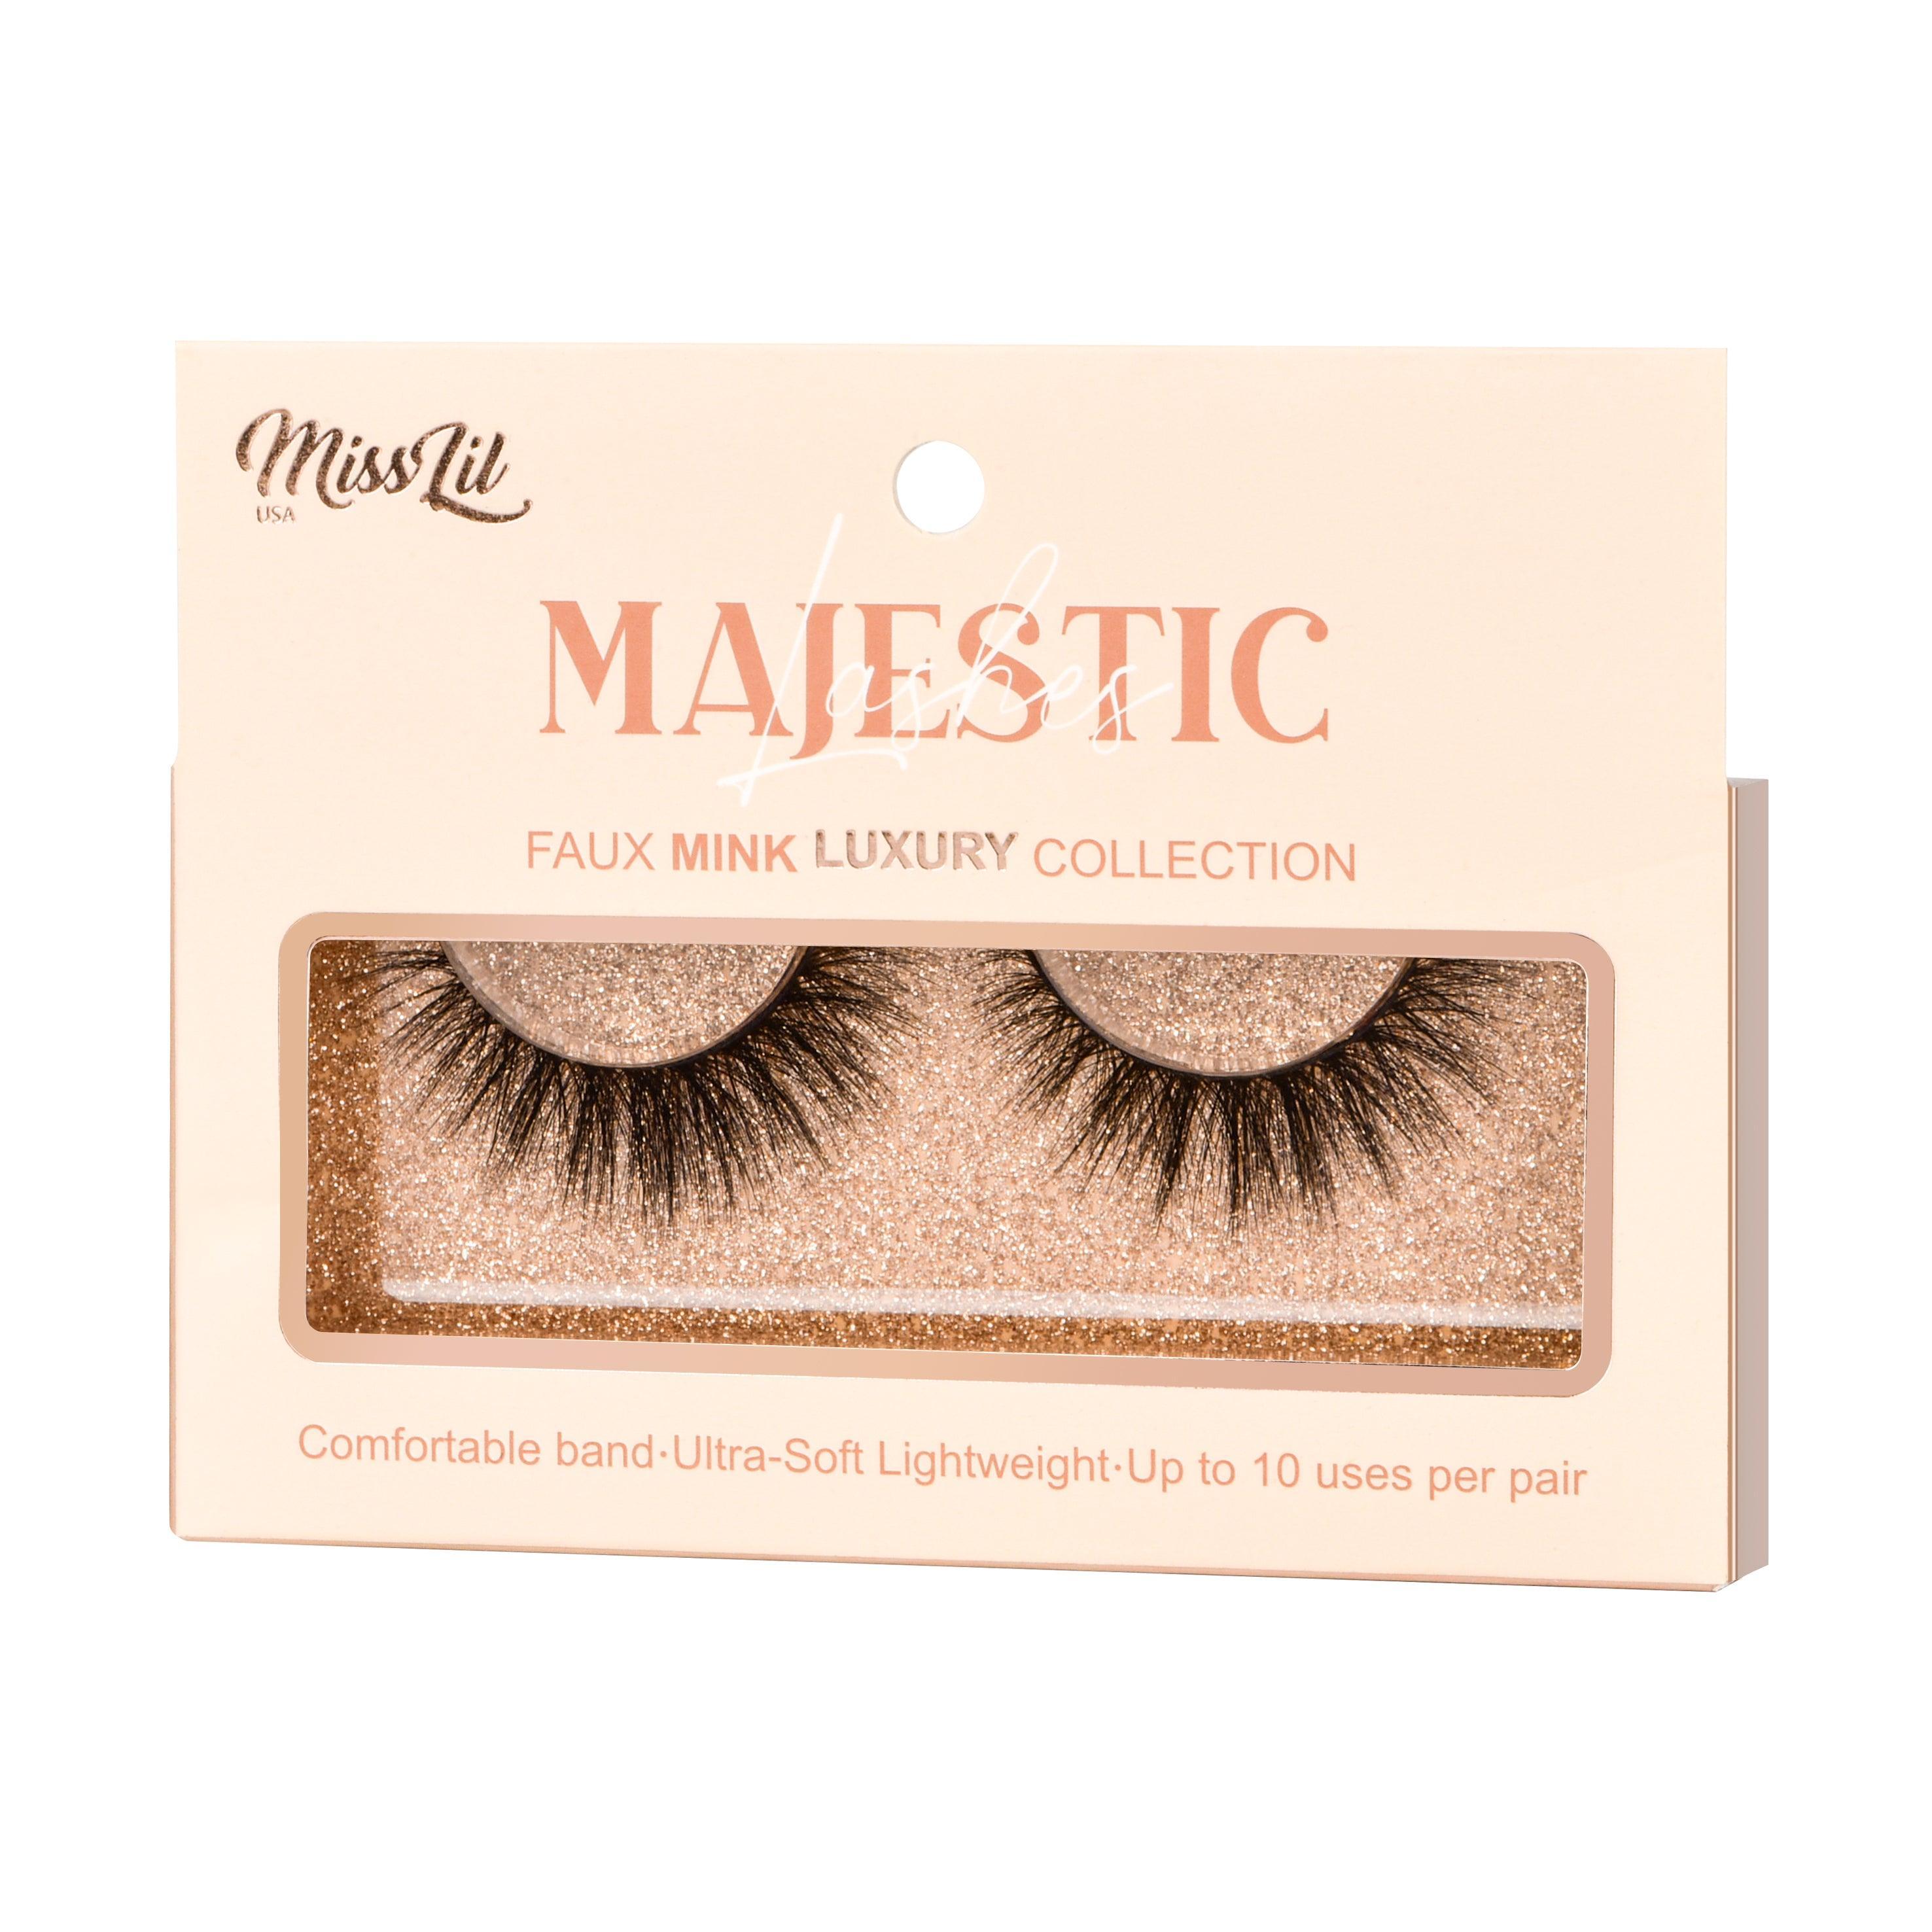 Majestic Collection 20 fake lashes - Miss Lil USA Wholesale